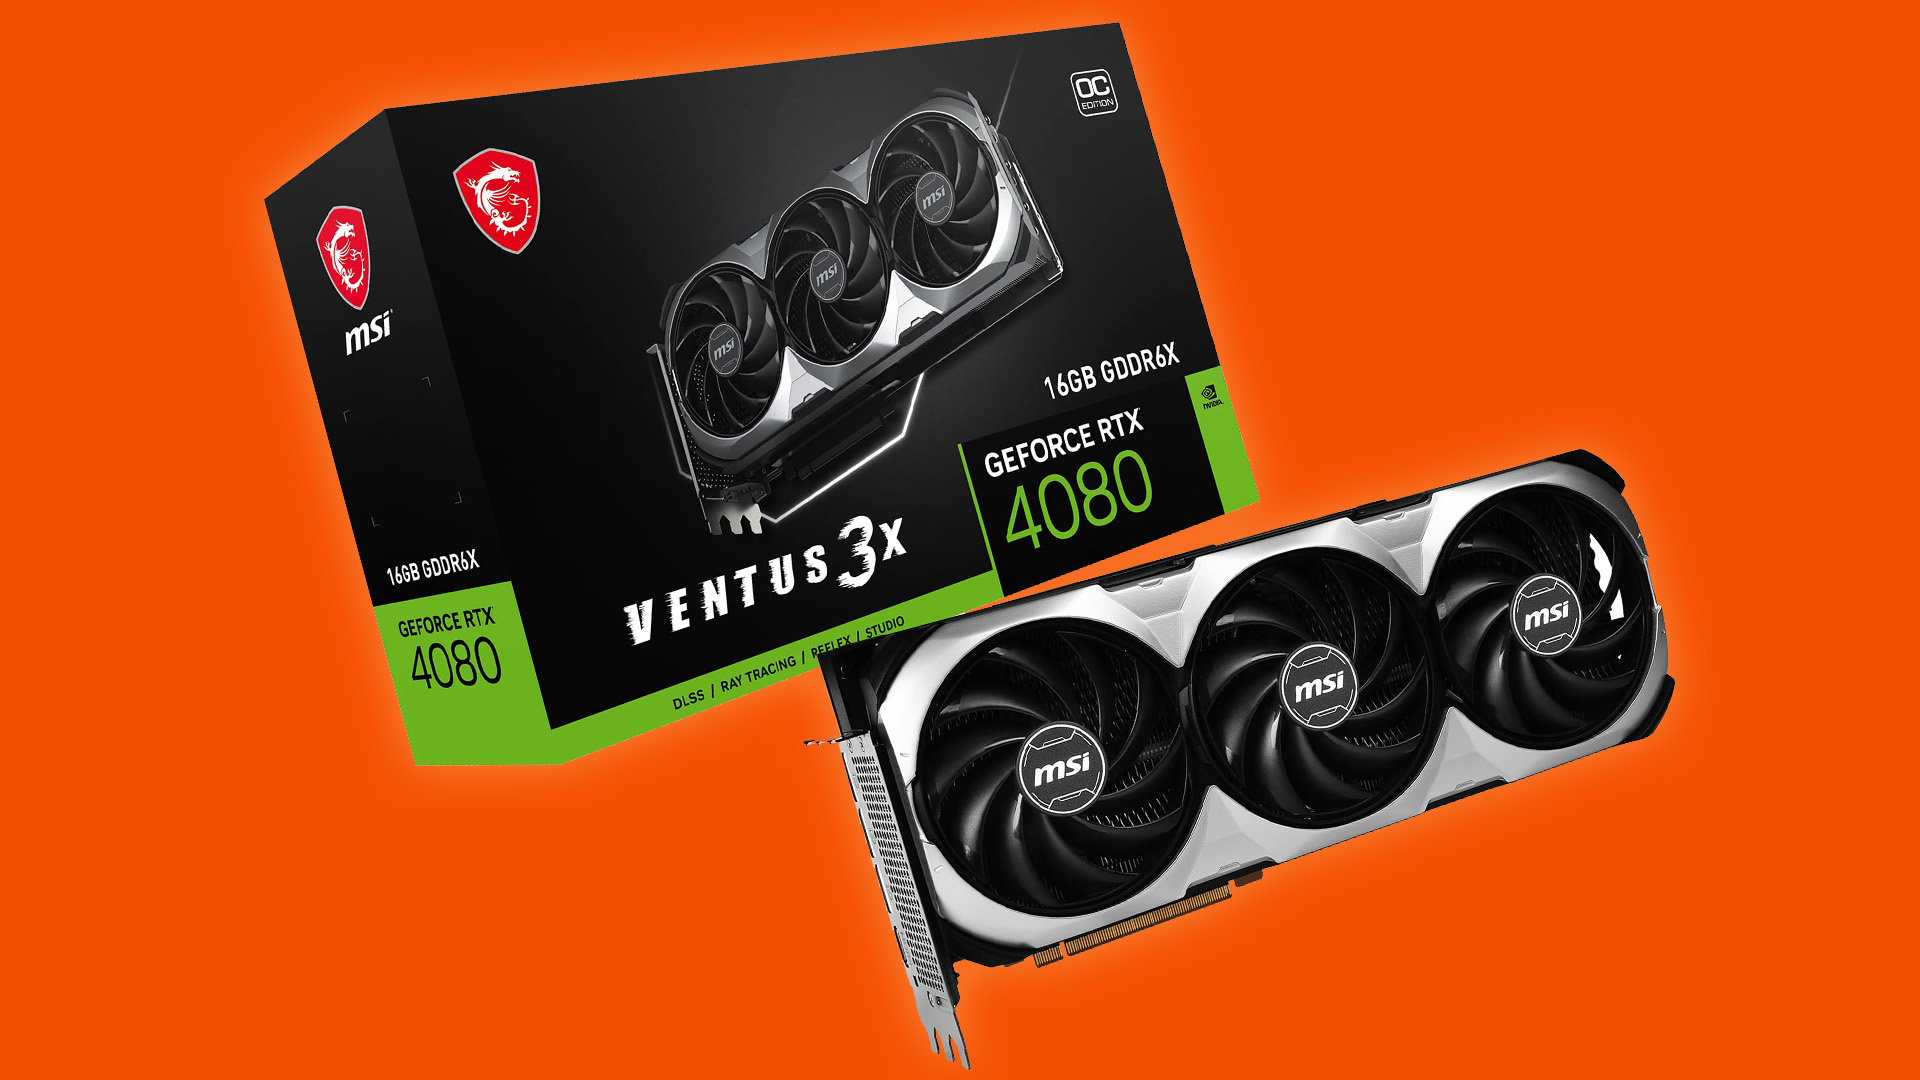 Nvidia GeForce RTX 4080 could get a much-needed price cut soon -   News